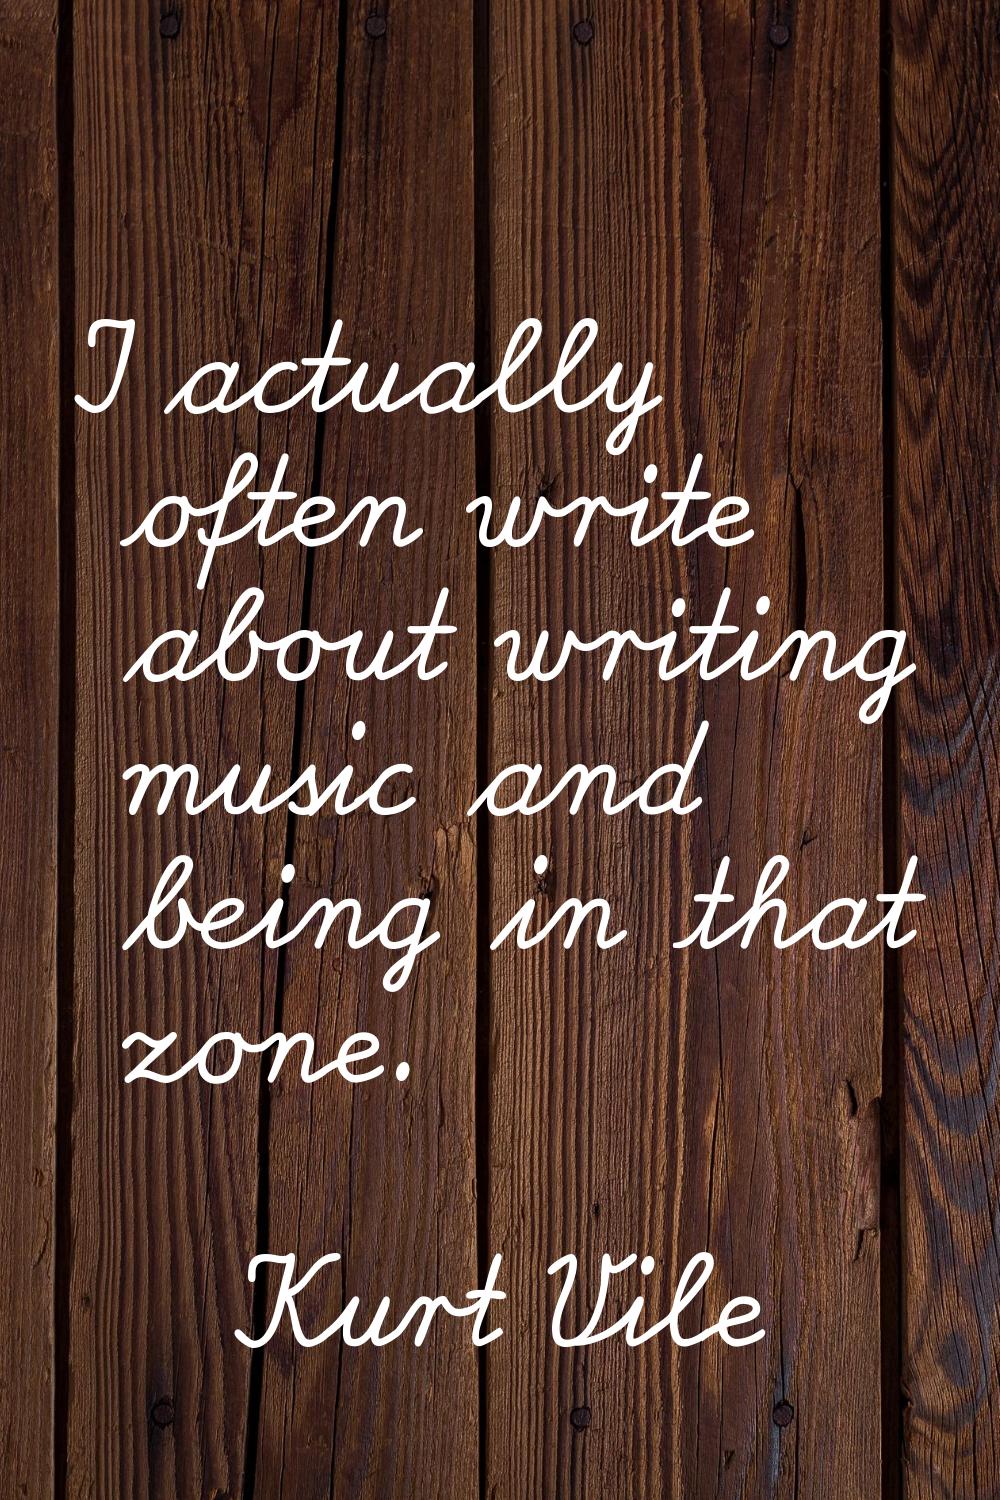 I actually often write about writing music and being in that zone.